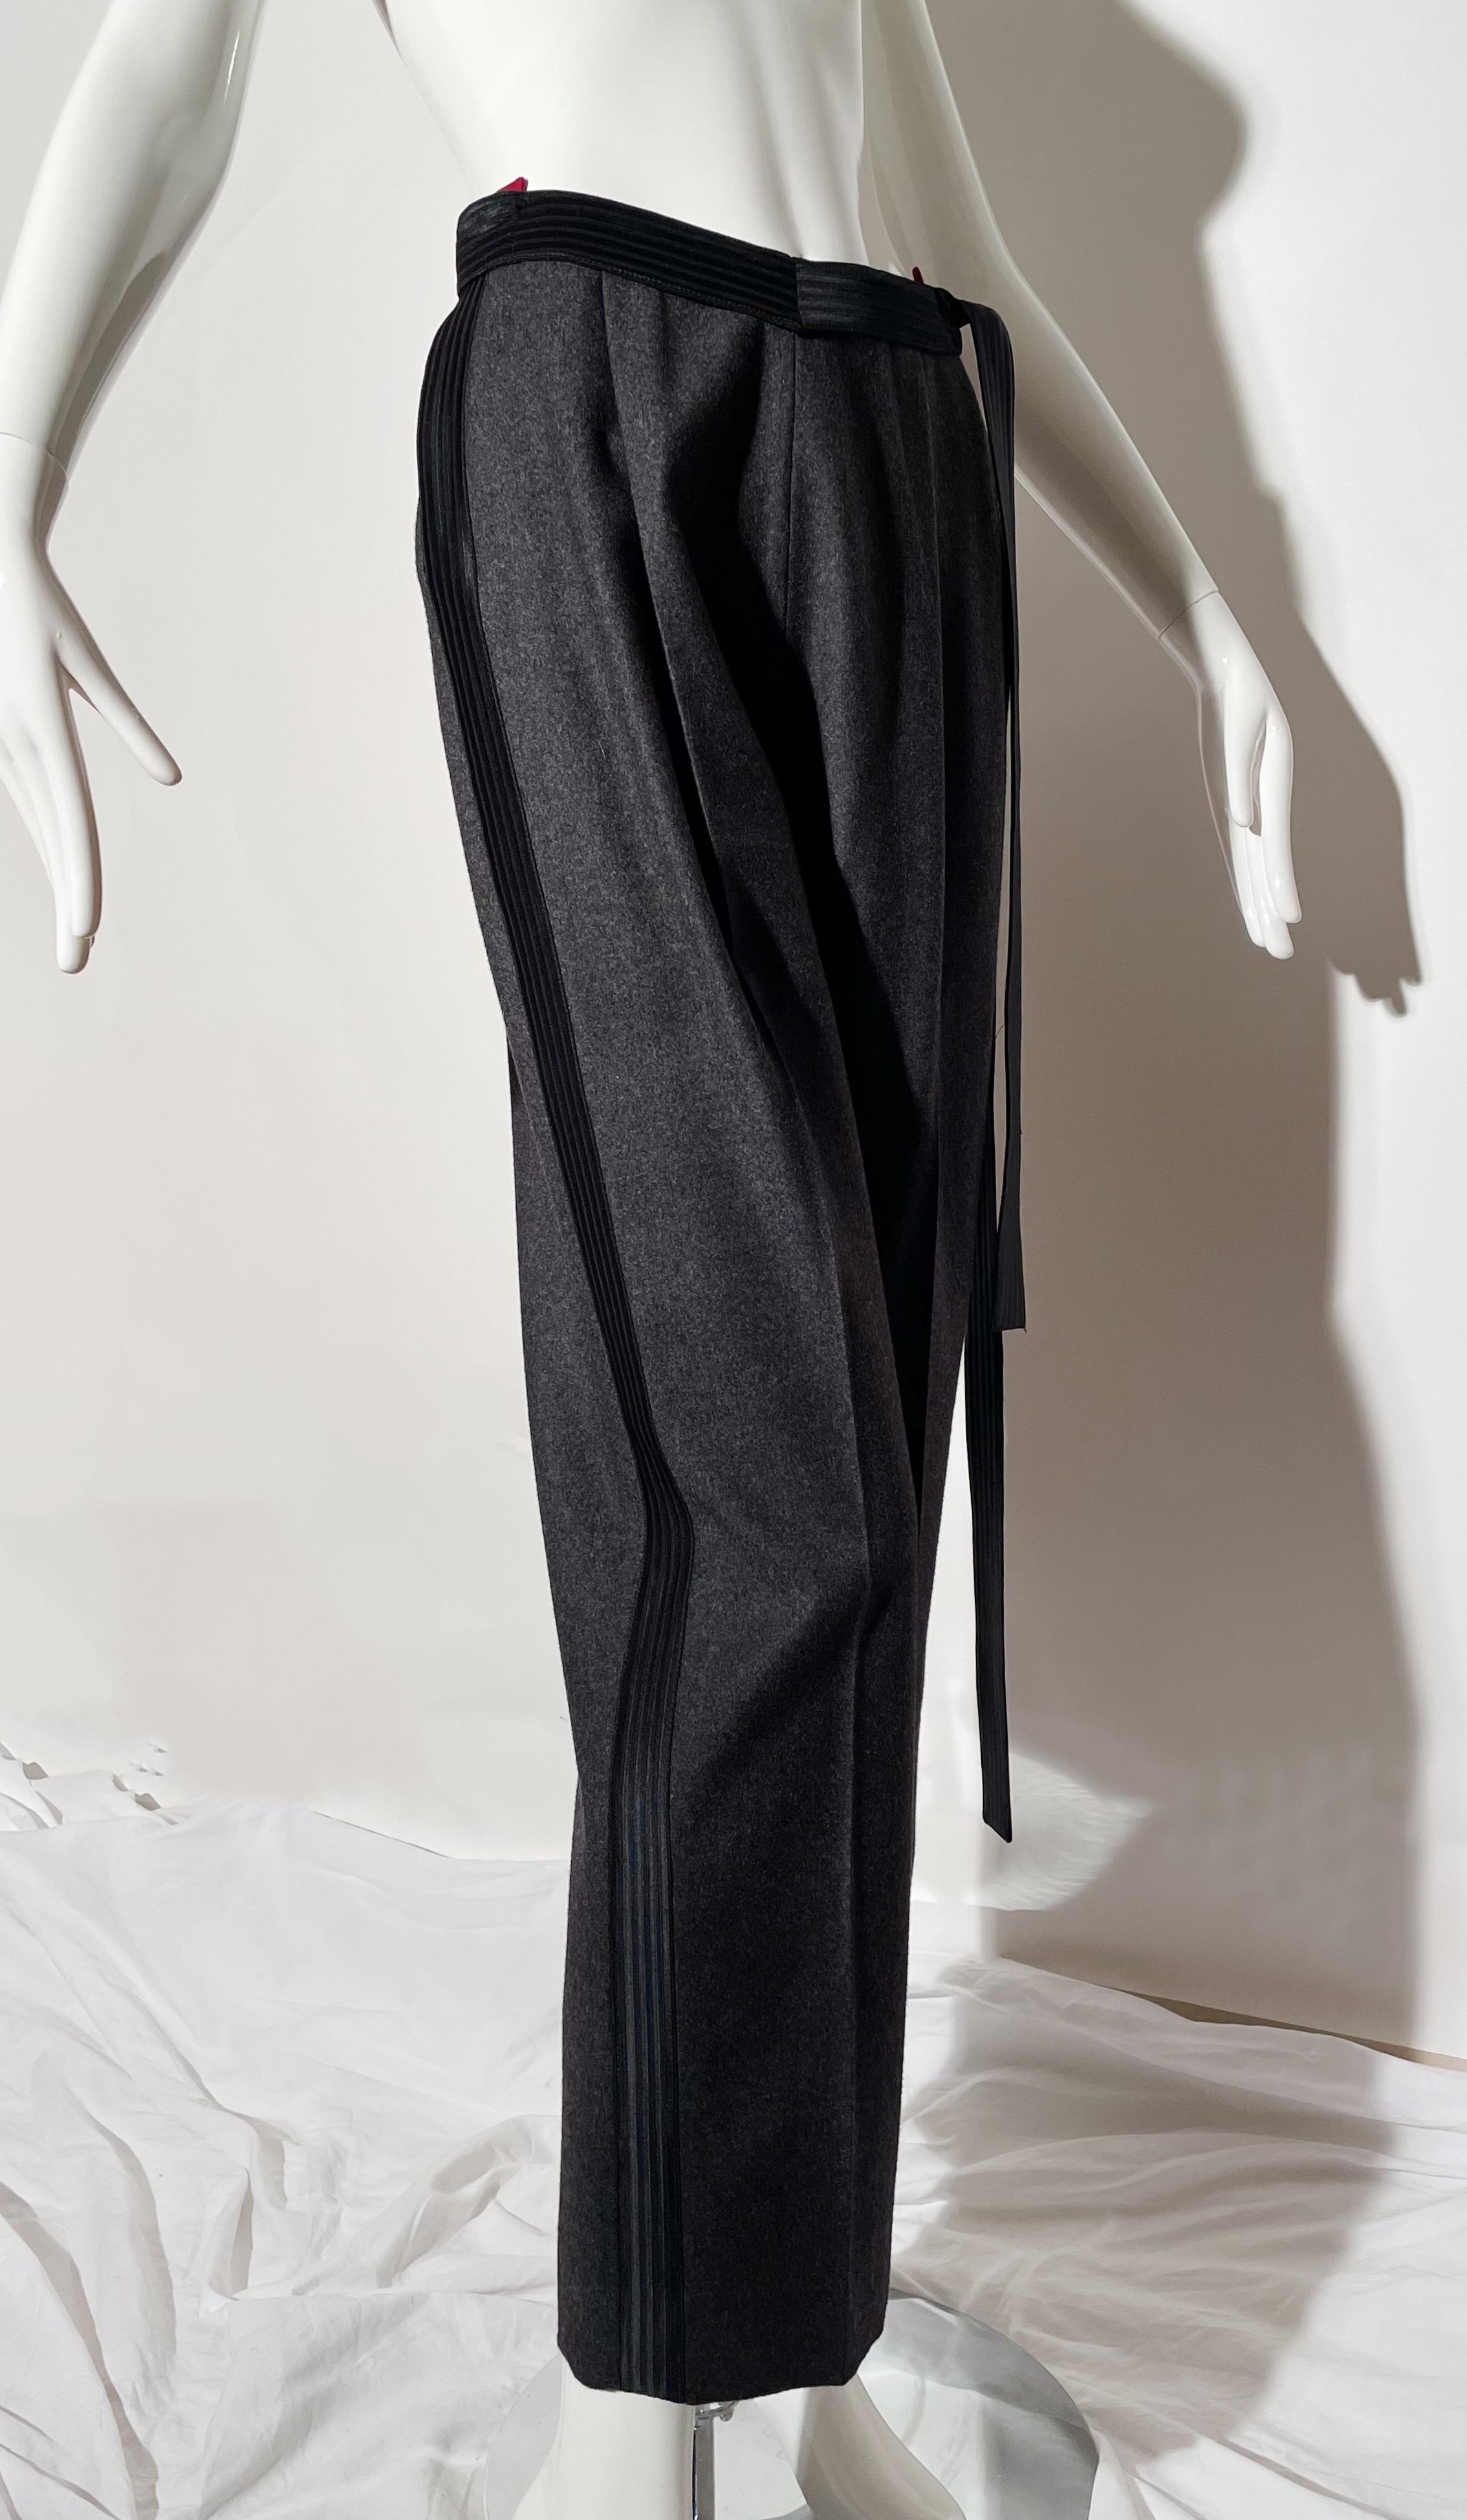 Gianfranco Ferre Tuxedo Trousers In Excellent Condition For Sale In Los Angeles, CA